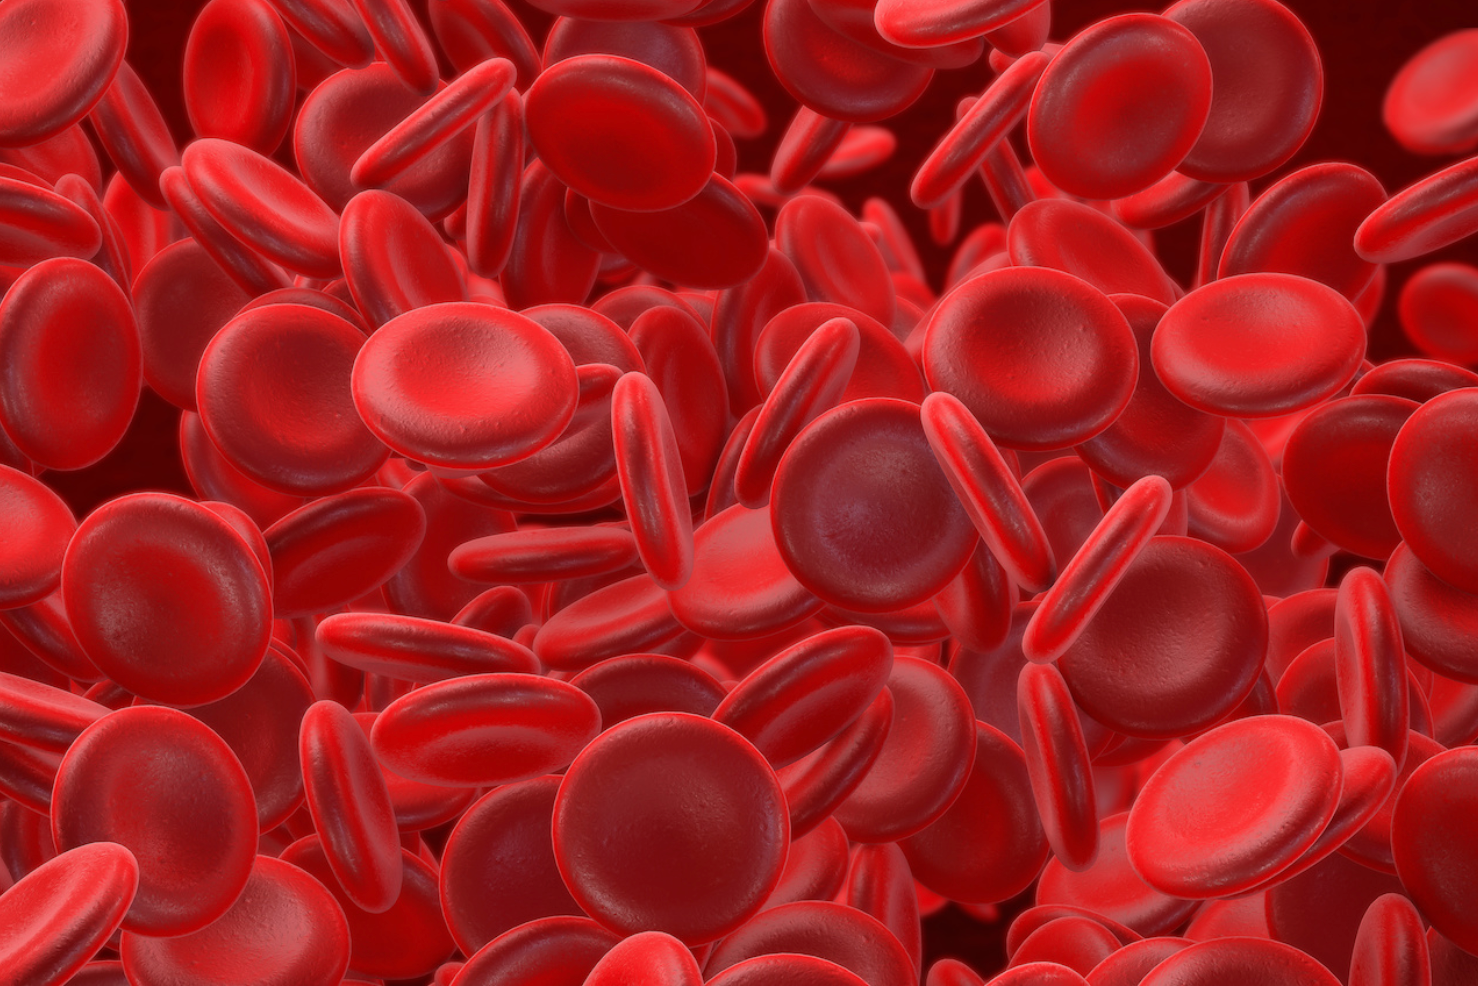 Improved Health Equity, Outcomes Reported With Omidubicel for Patients With Blood Cancers